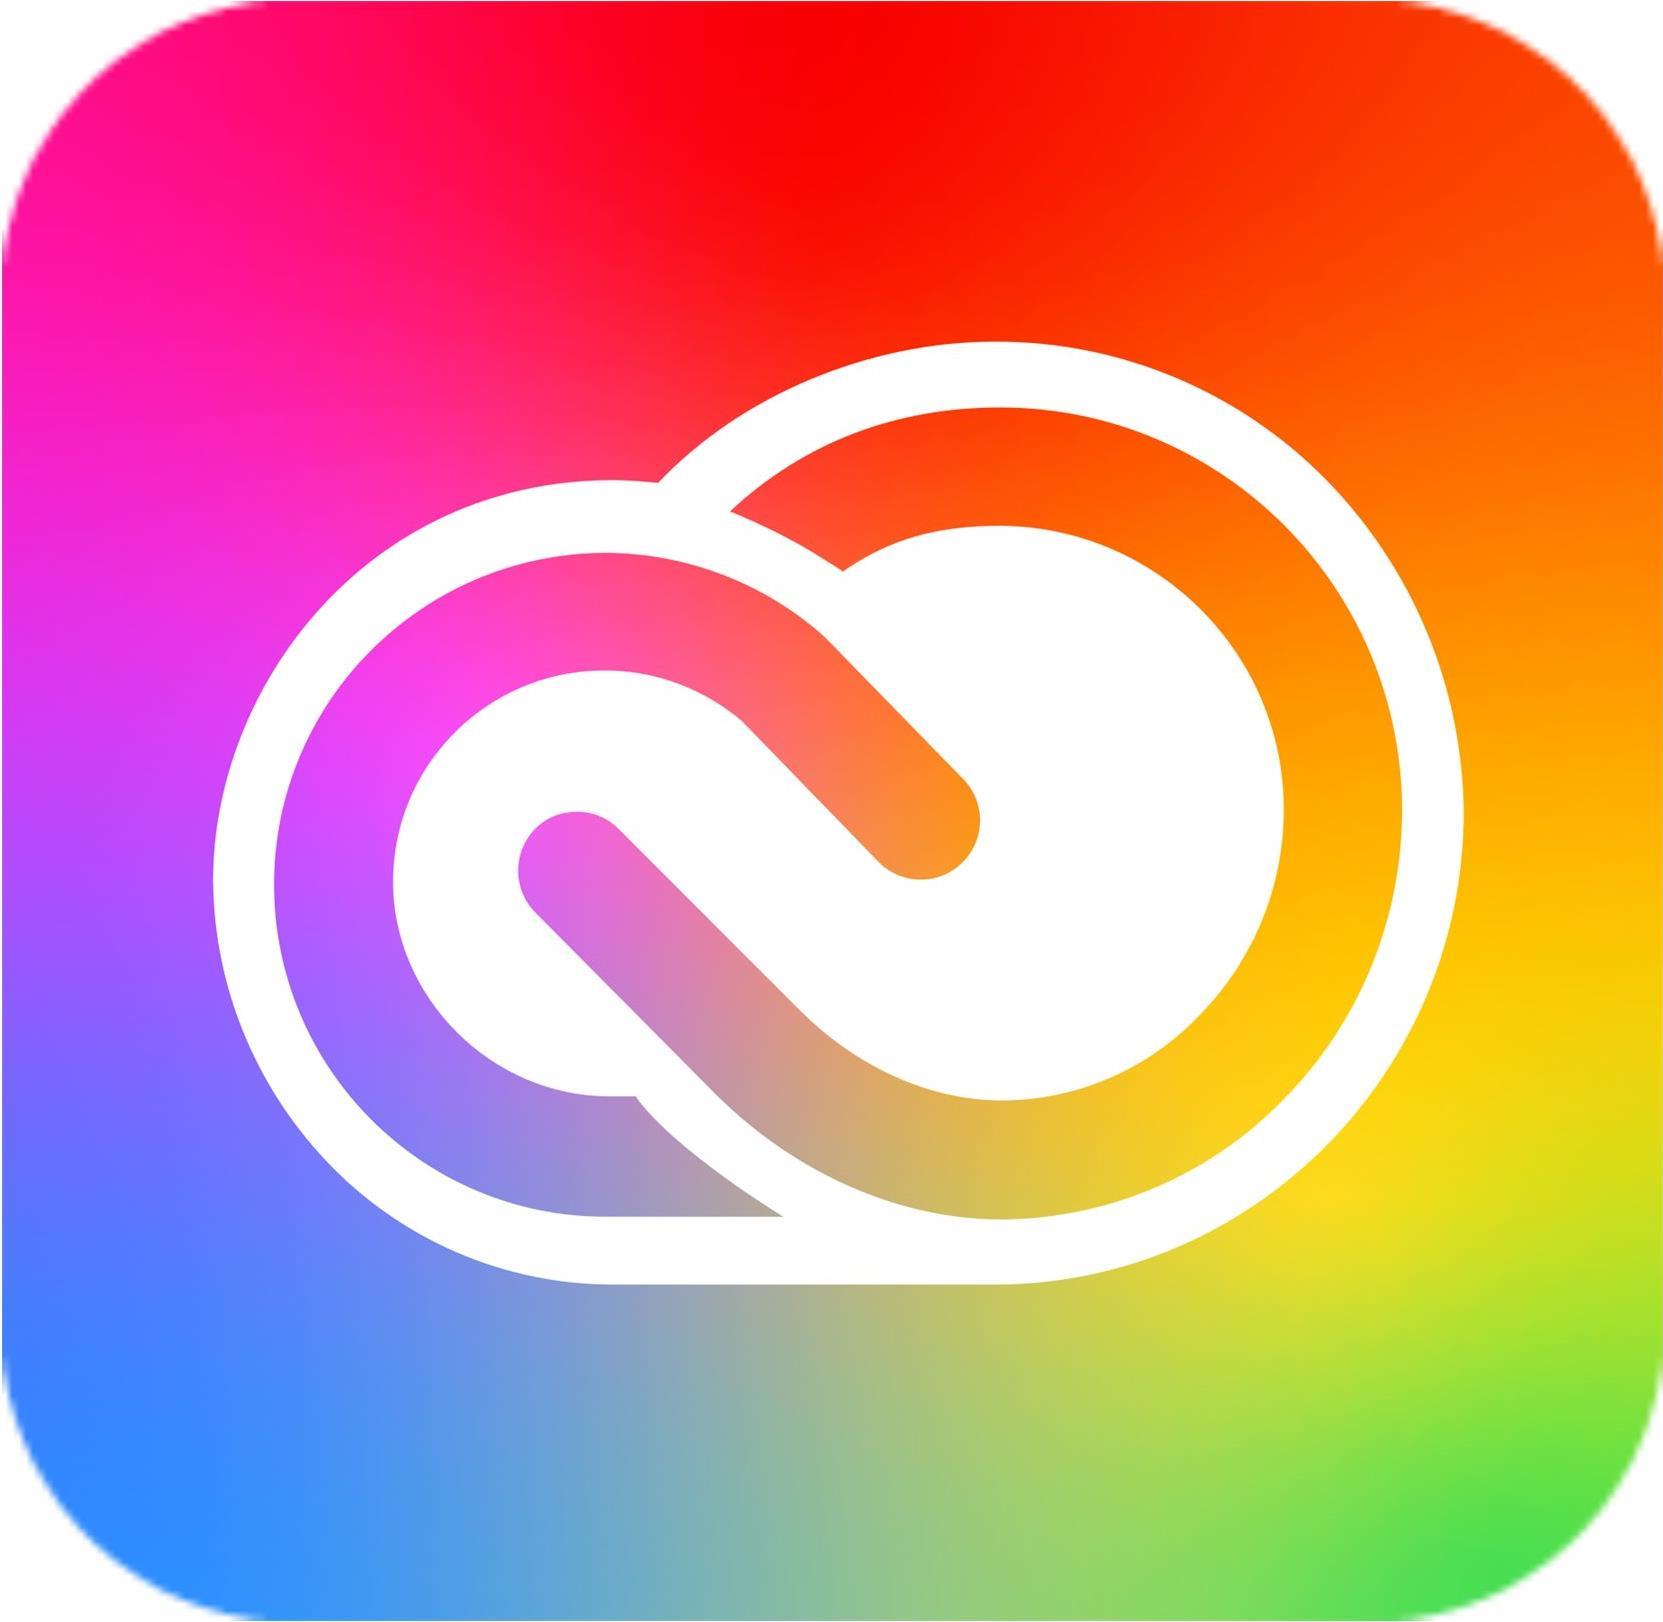 Adobe Creative Cloud All Apps - Pro for teams - Subscription Renewal - 1 Benutzer - VIP Select - Stufe 13 (50-99) - 3 years commitment, Introductory Full Year Forecast - Win, Mac - Multi European Languages von Adobe